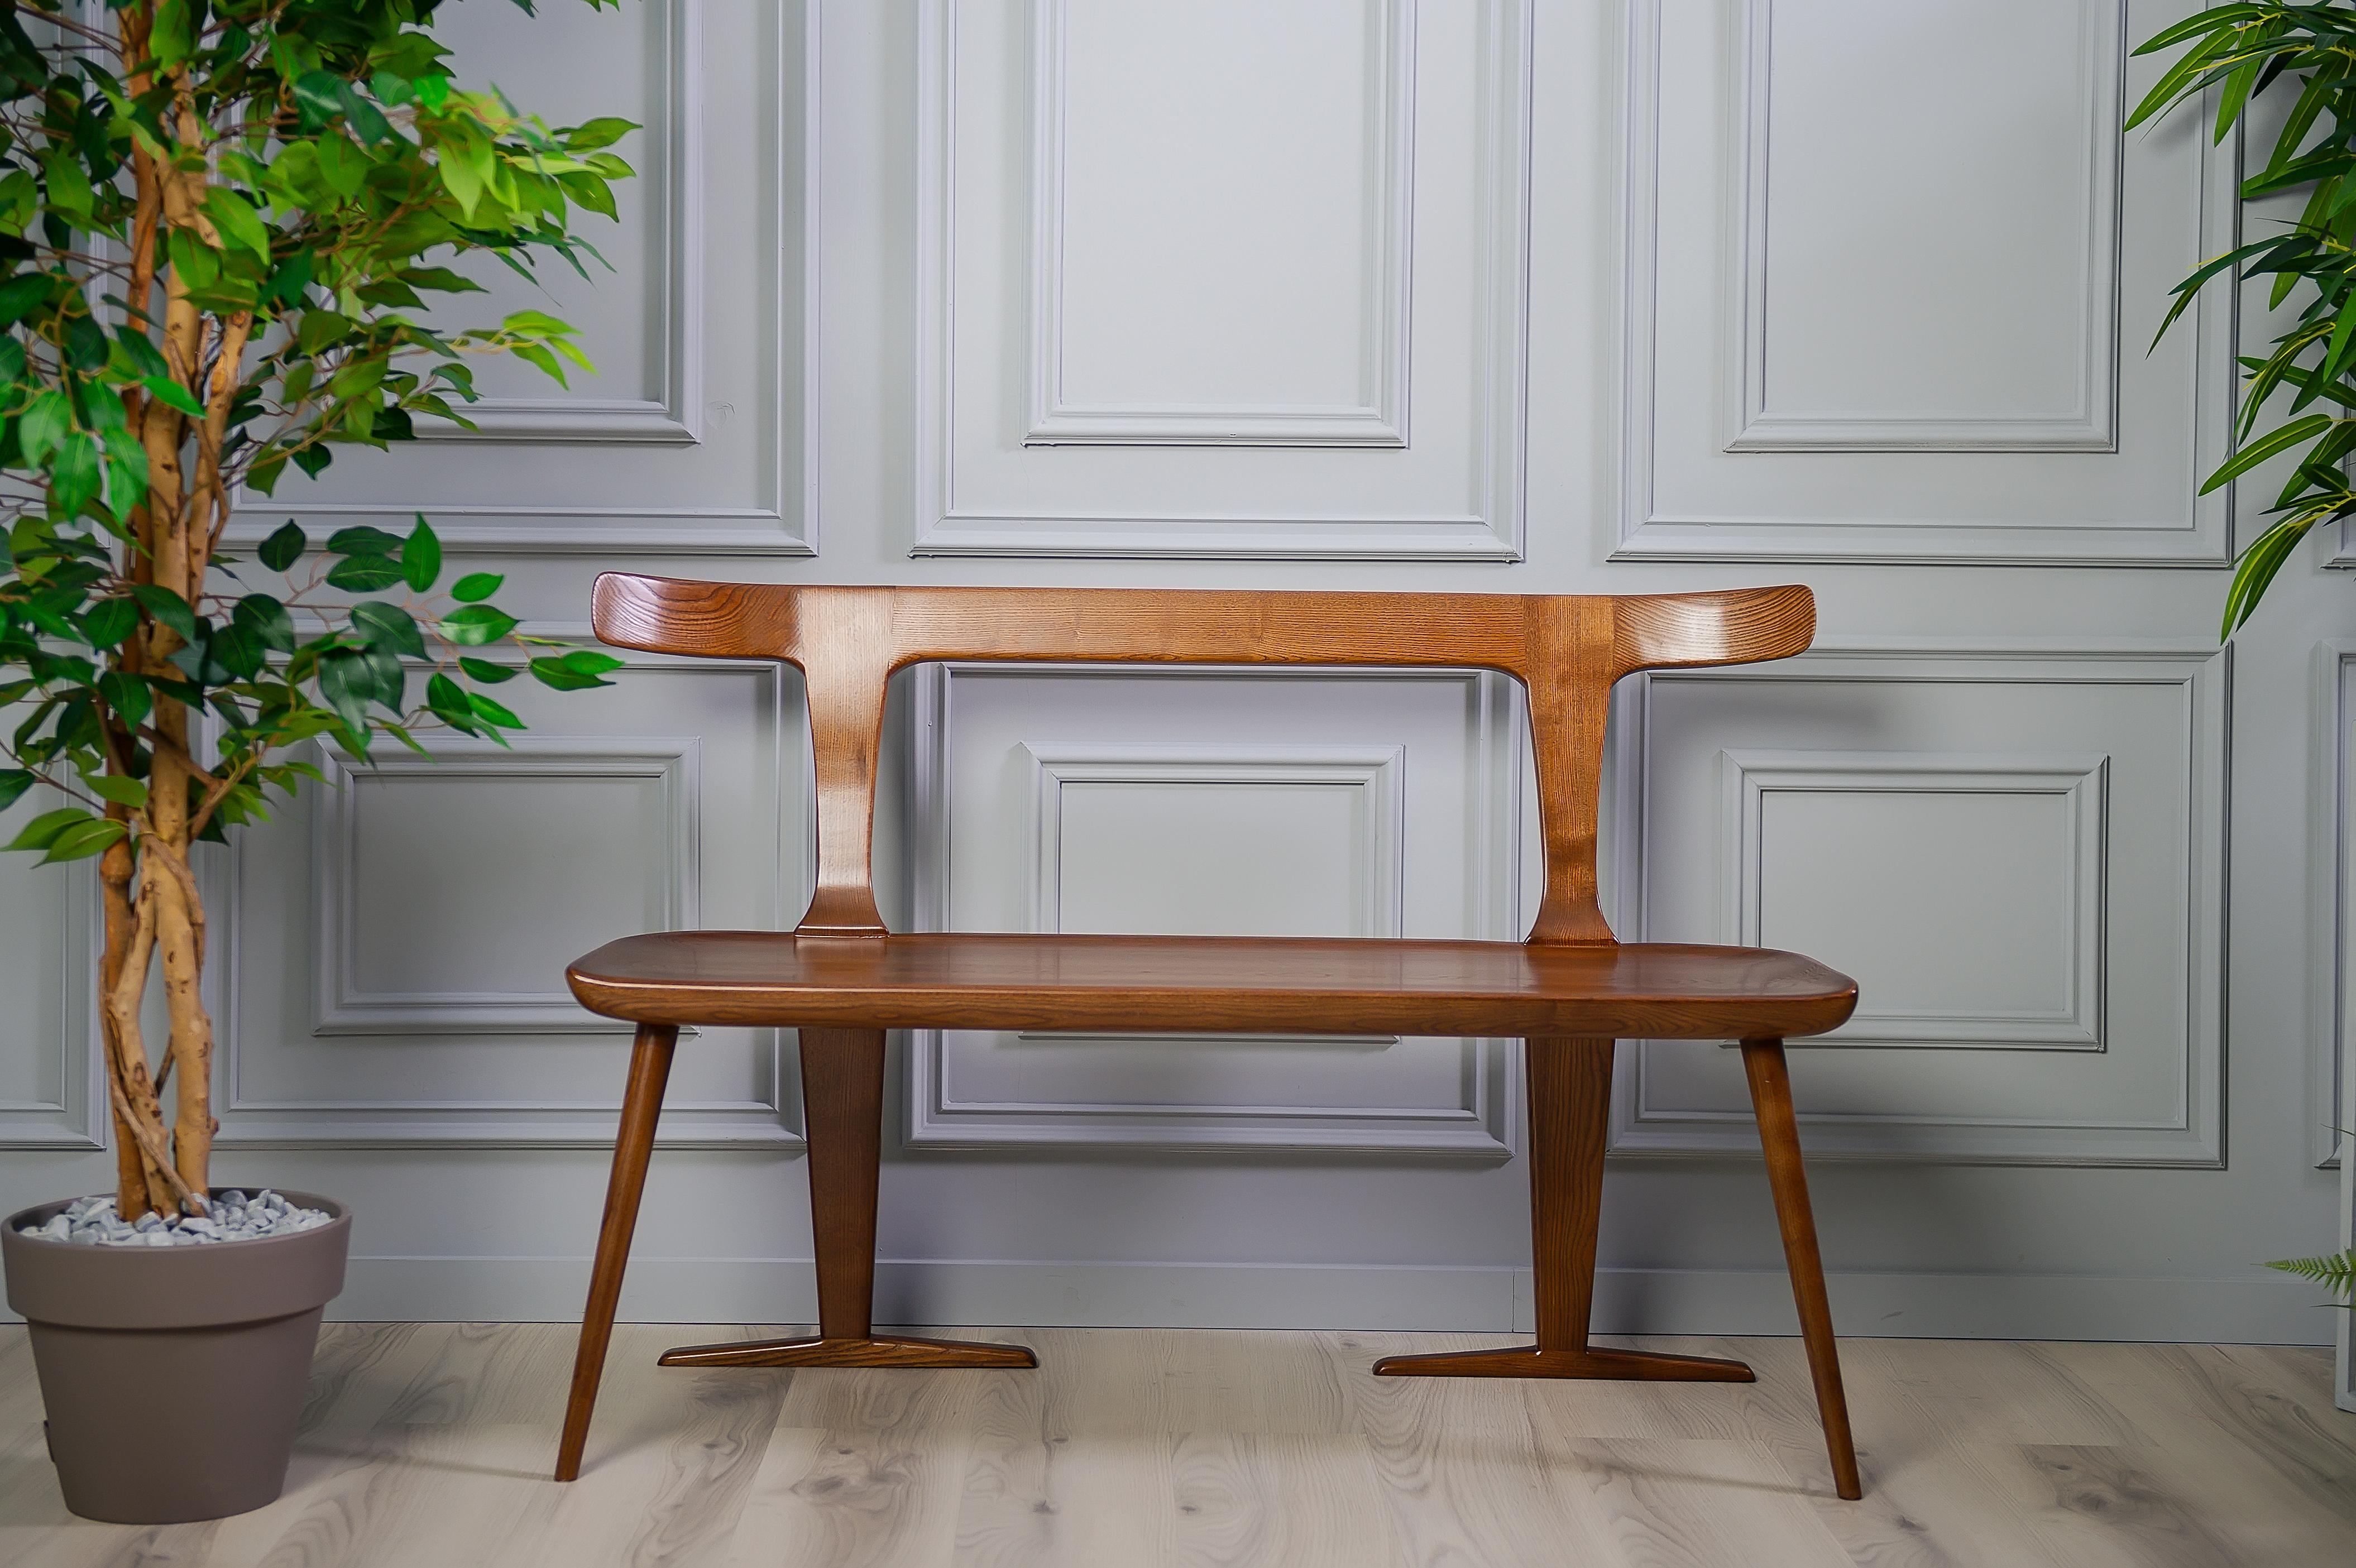 The Eola bench provides a multi-use bench that can be easily placed in the kitchen, dining room, den, lounge or other space. With a double backing and forward angled legs, this Mid-Century Modern piece offers a uniqueness that otherwise cannot be